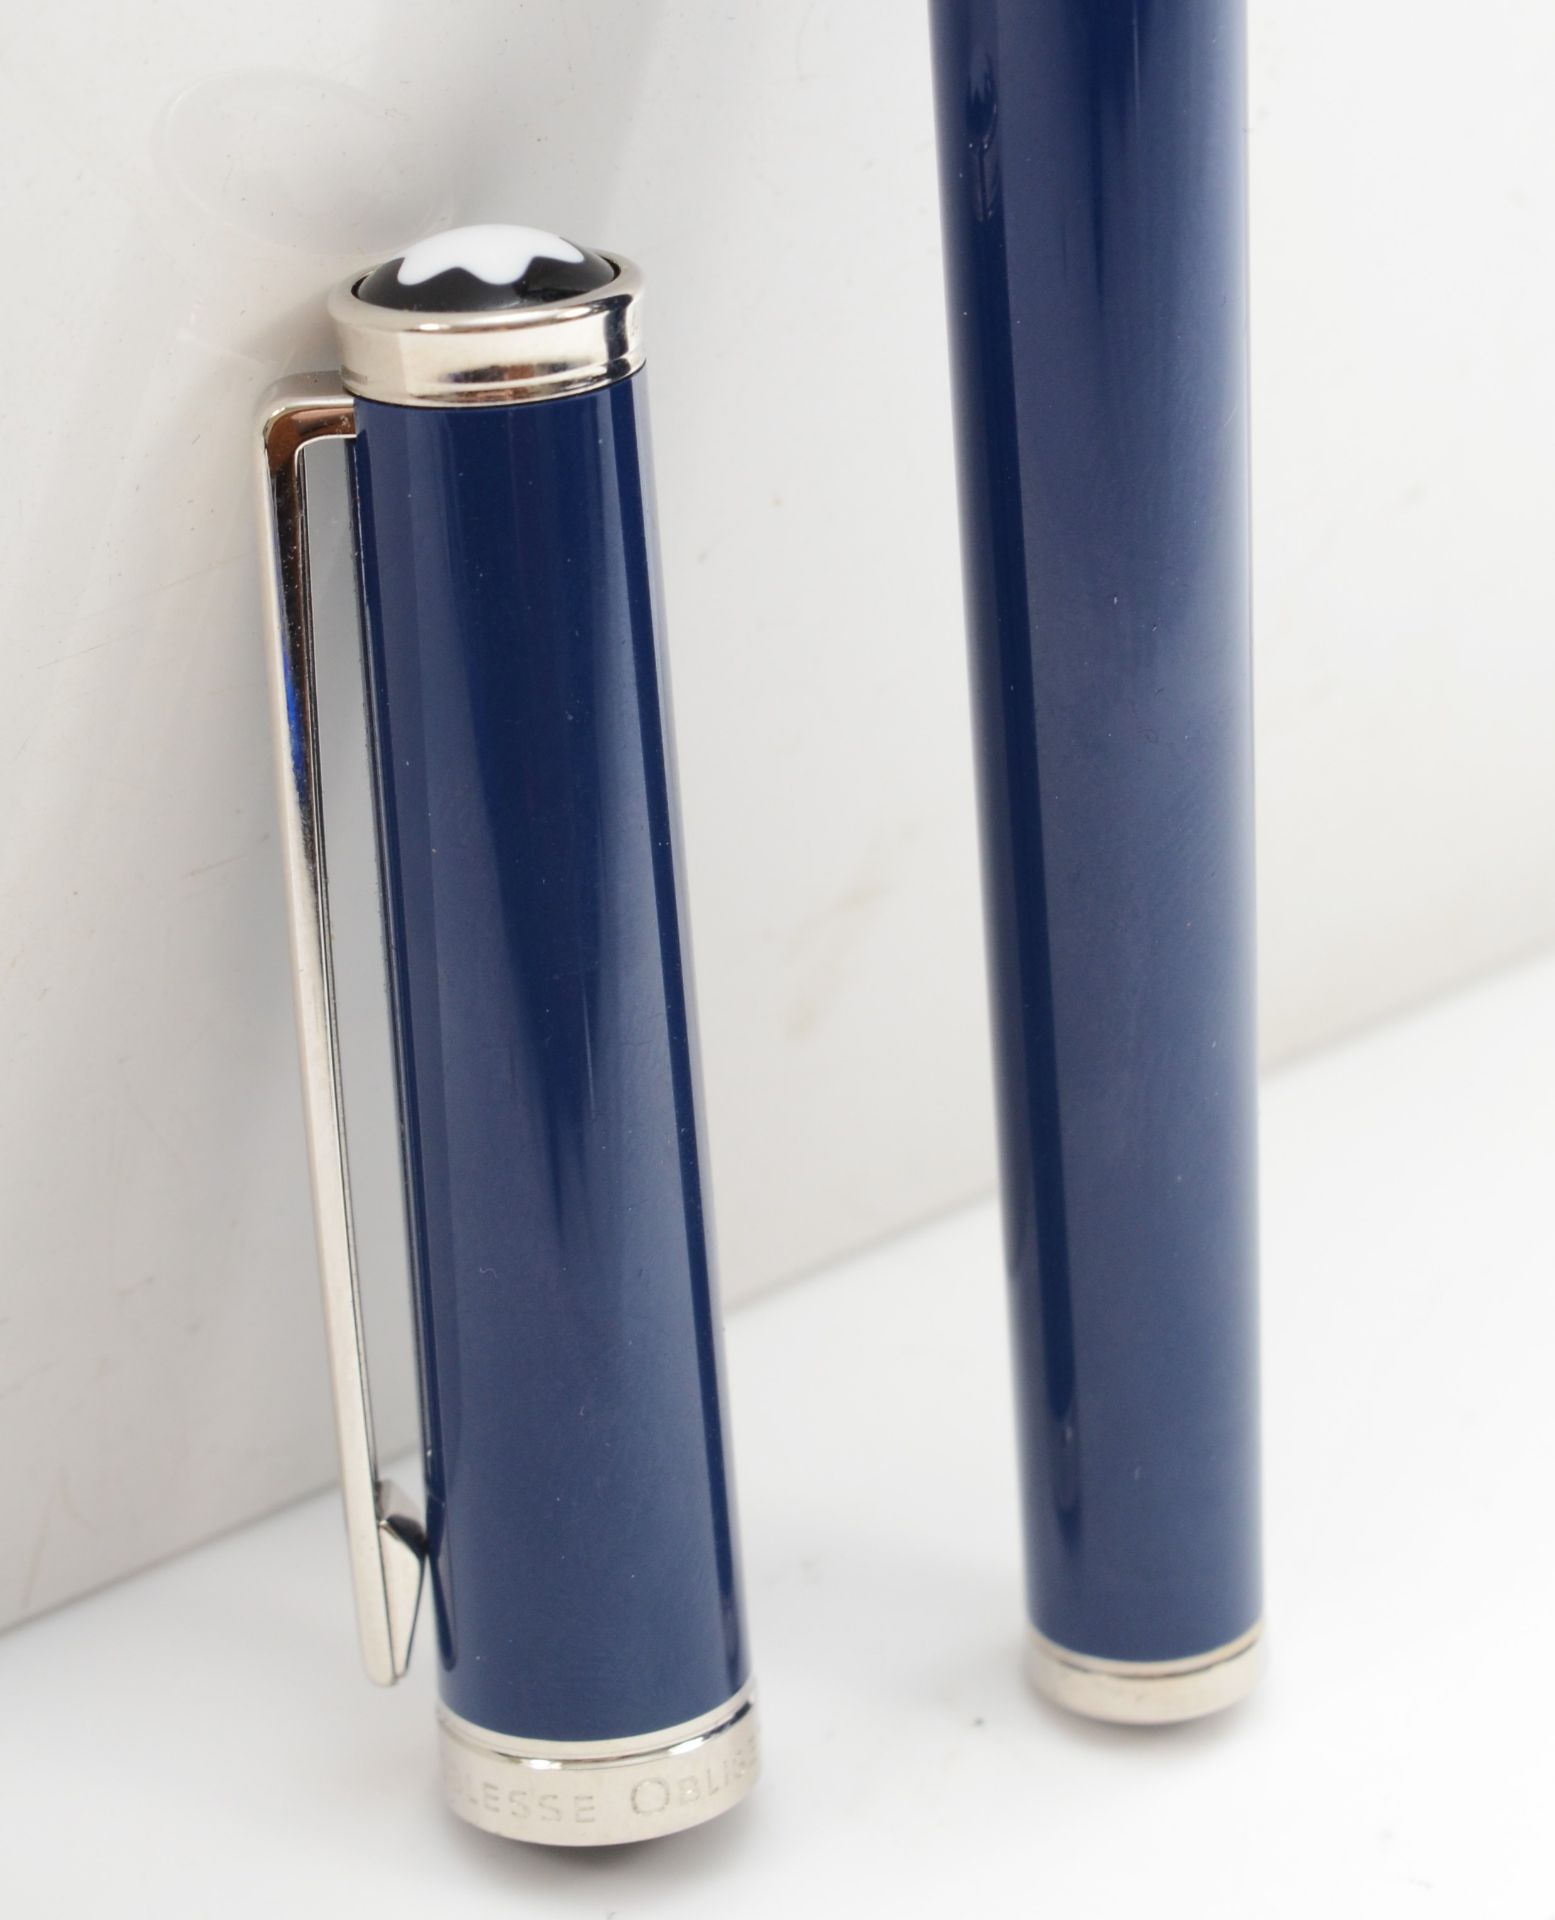 Mont Blanc Noblesse Oblige, a blue cartridge fountain pen with 14K white gold nib - Image 2 of 2